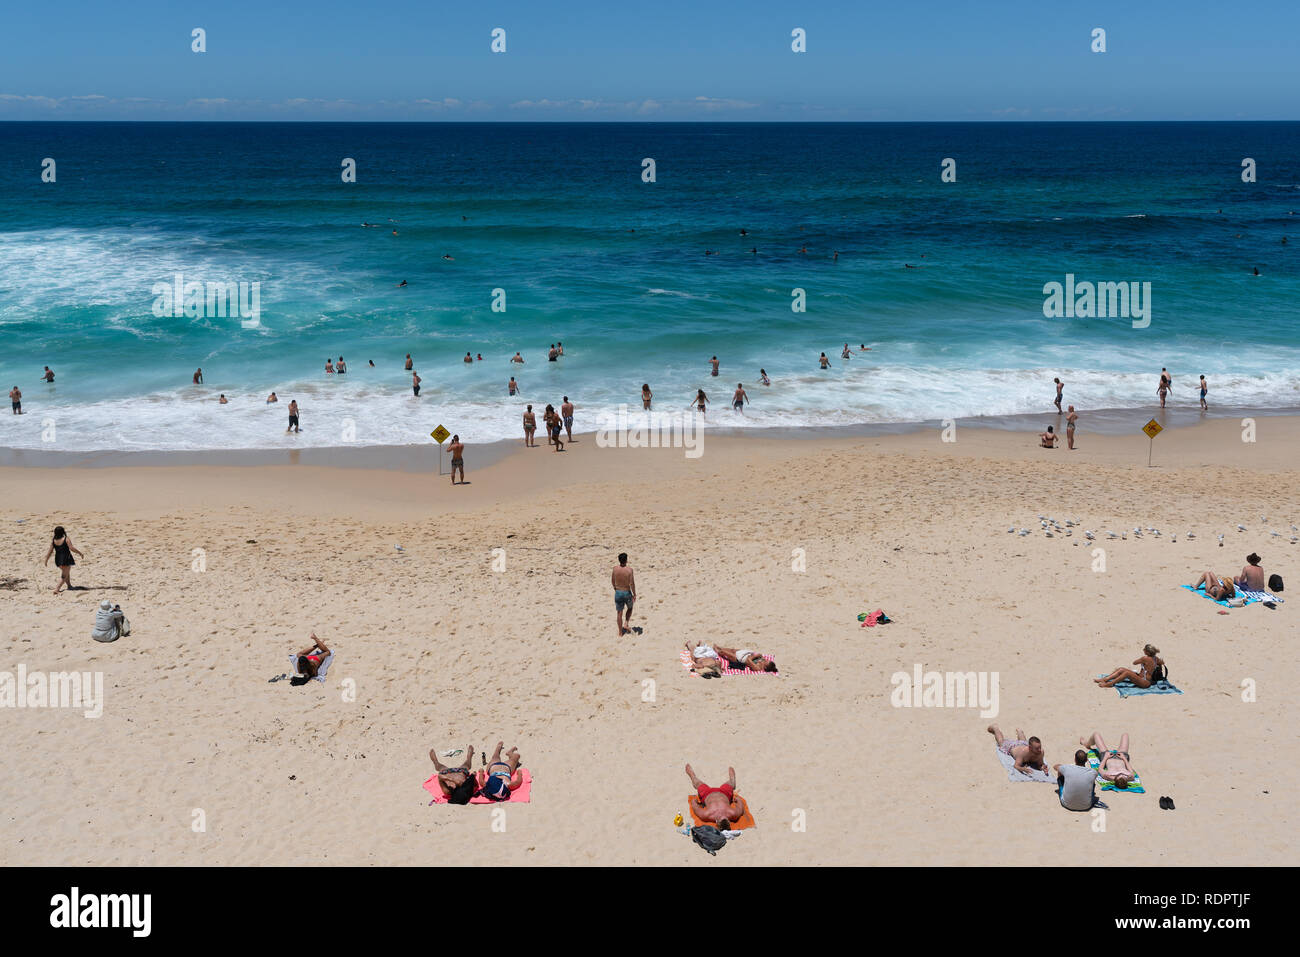 24th December 2018, Bronte Sydney Australia: people enjoying hot sunny summer day on Bronte beach and swimming in the sea in Sydney NSW Australia Stock Photo